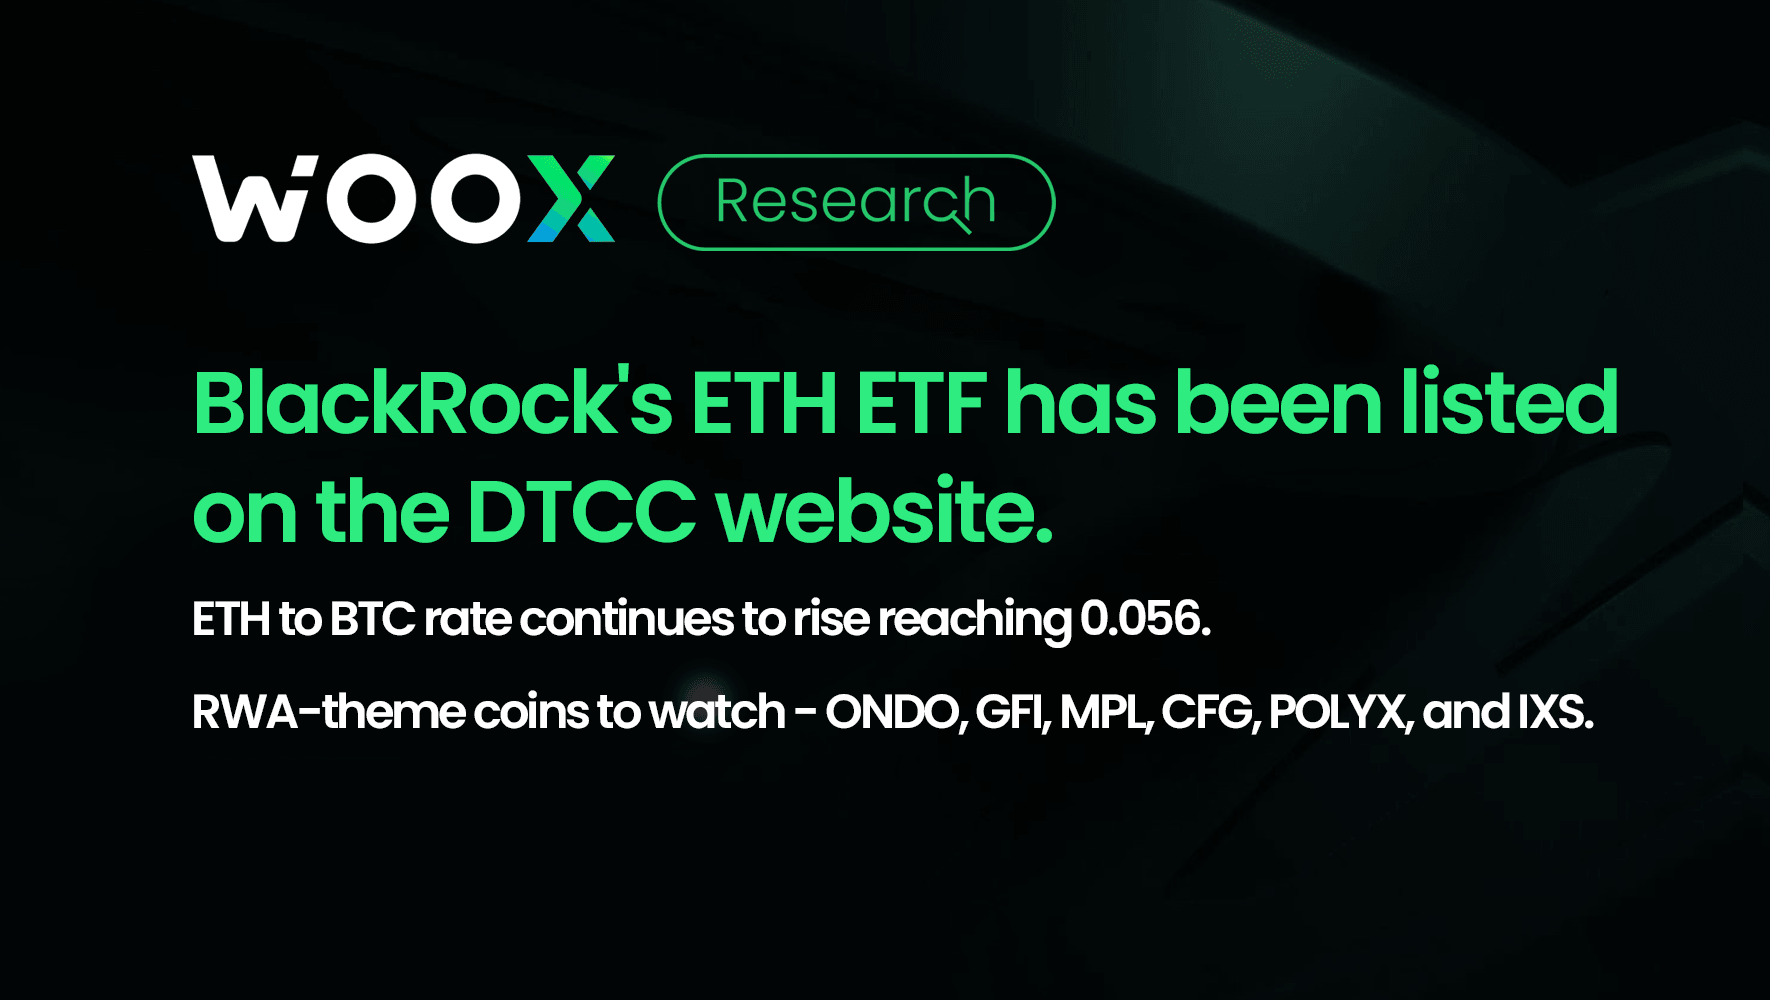 BlackRock's Ethereum ETF has been listed on the DTCC website